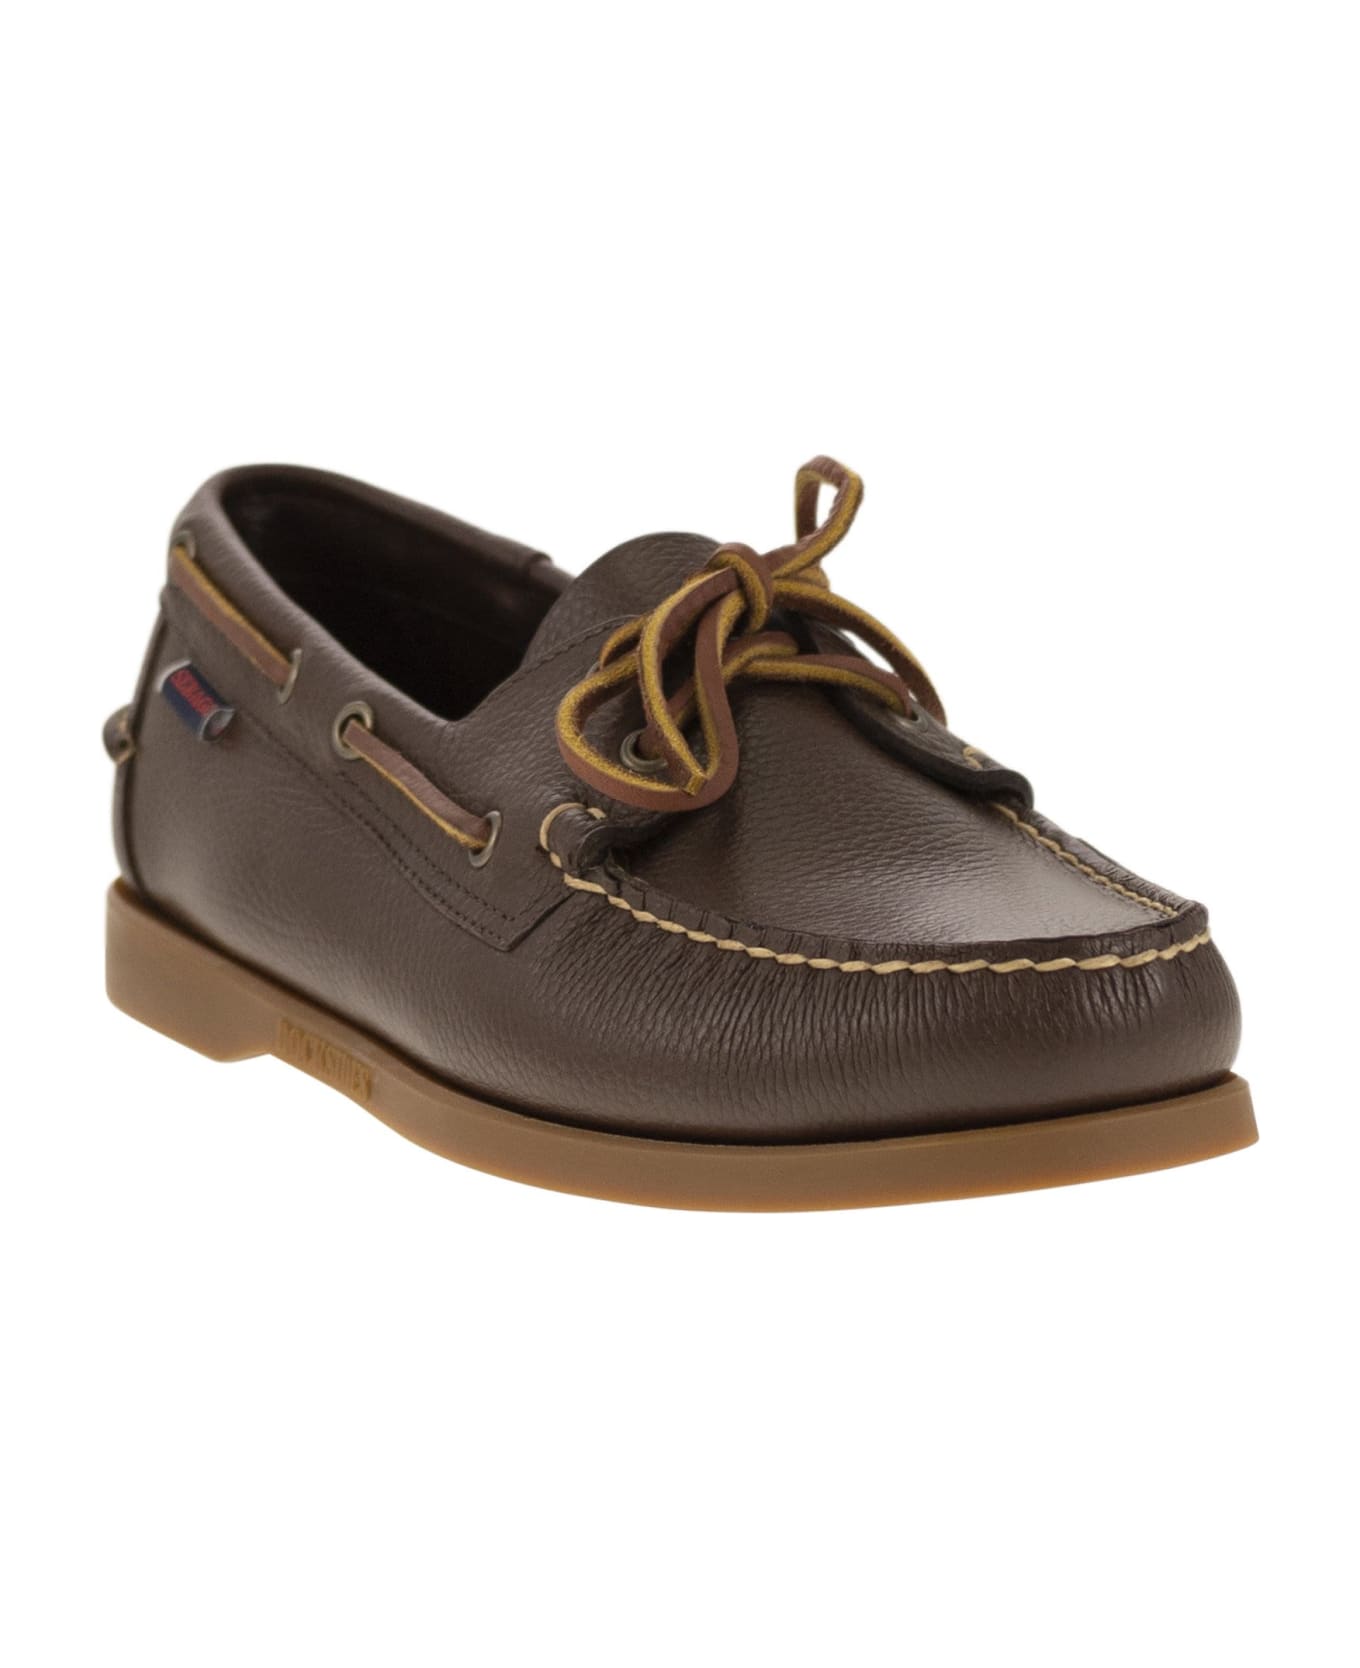 Sebago Portland - Moccasin With Grained Leather - Brown ローファー＆デッキシューズ